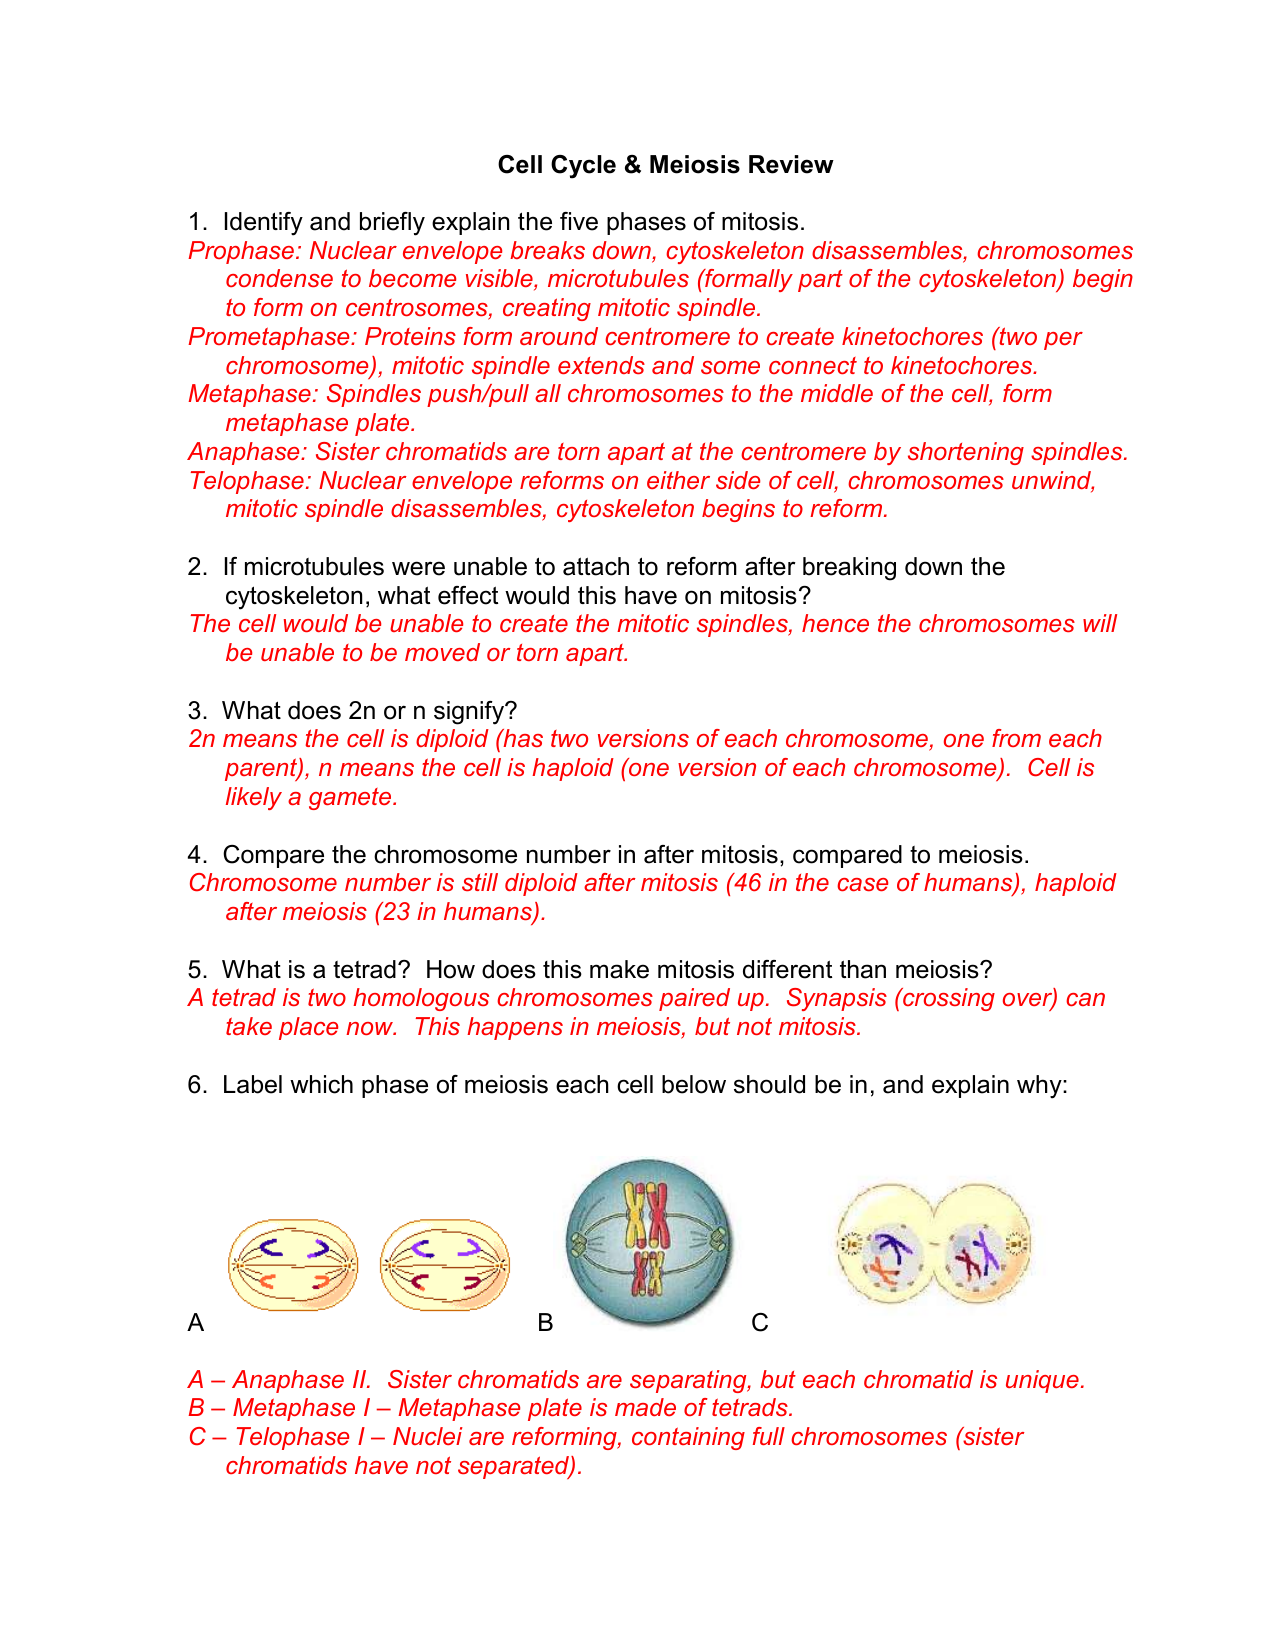 mitosis-meiosis-review-answers-122